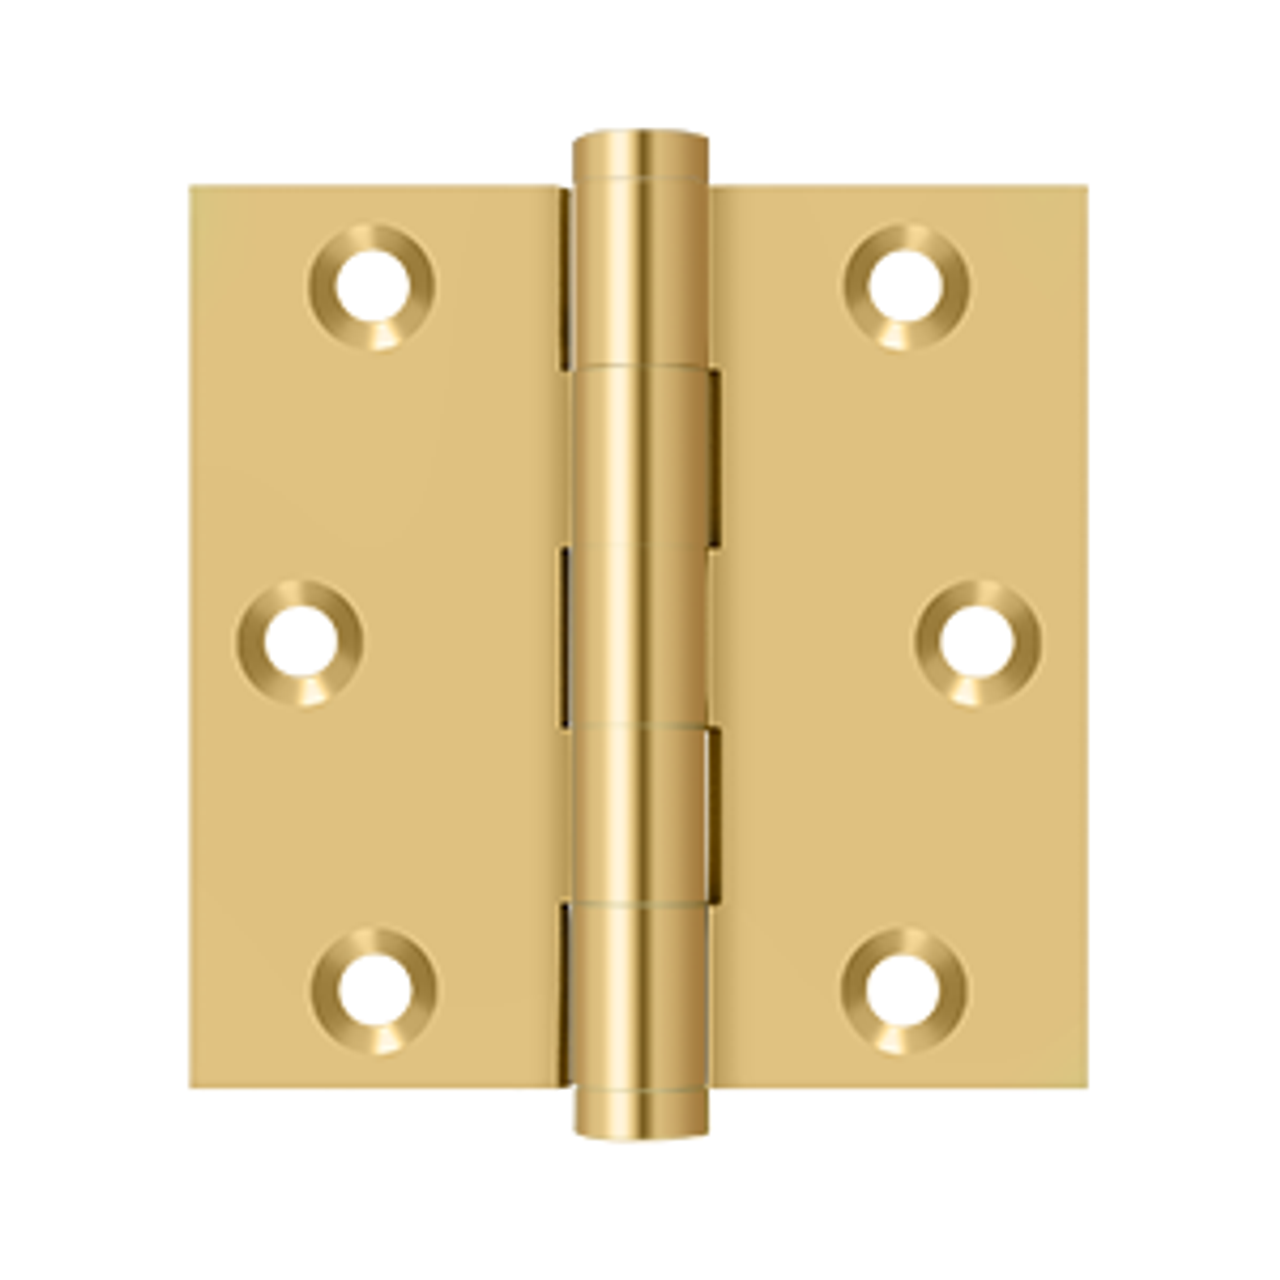 Deltana DSB3 SERIES SOLID BRASS 3" X 3" SQUARE HINGE